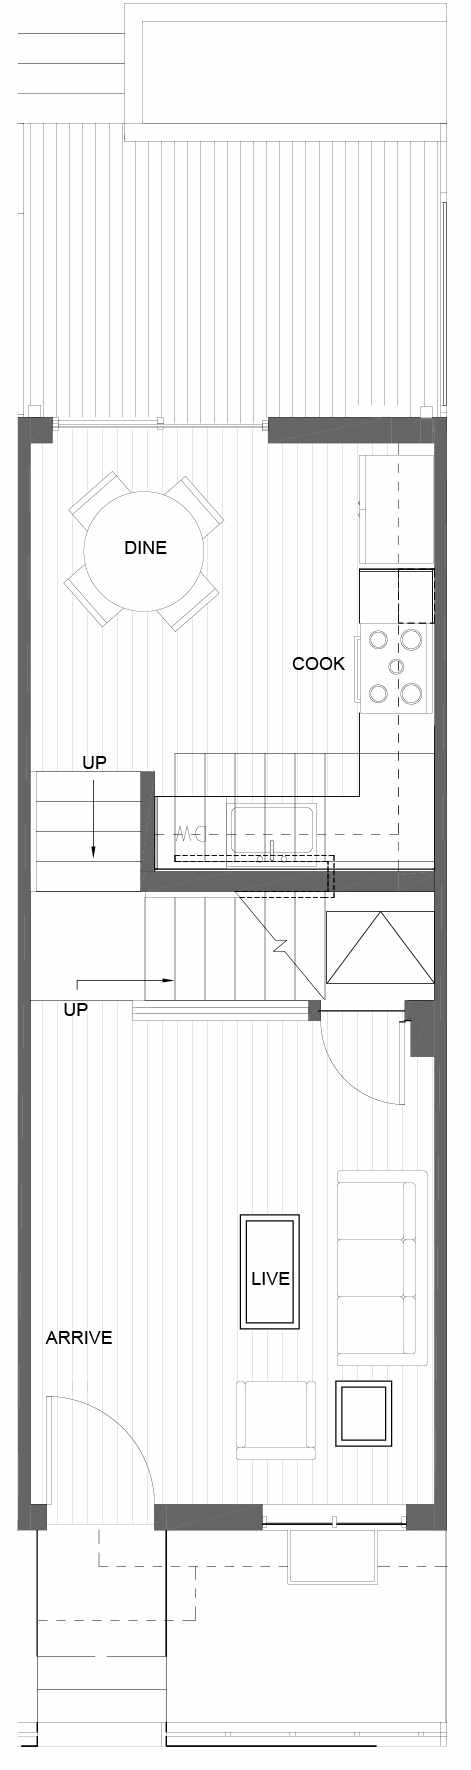 First Floor Plan of 3015B 30th Ave W, One of the Lochlan Townhomes by Isola Homes in Magnolia